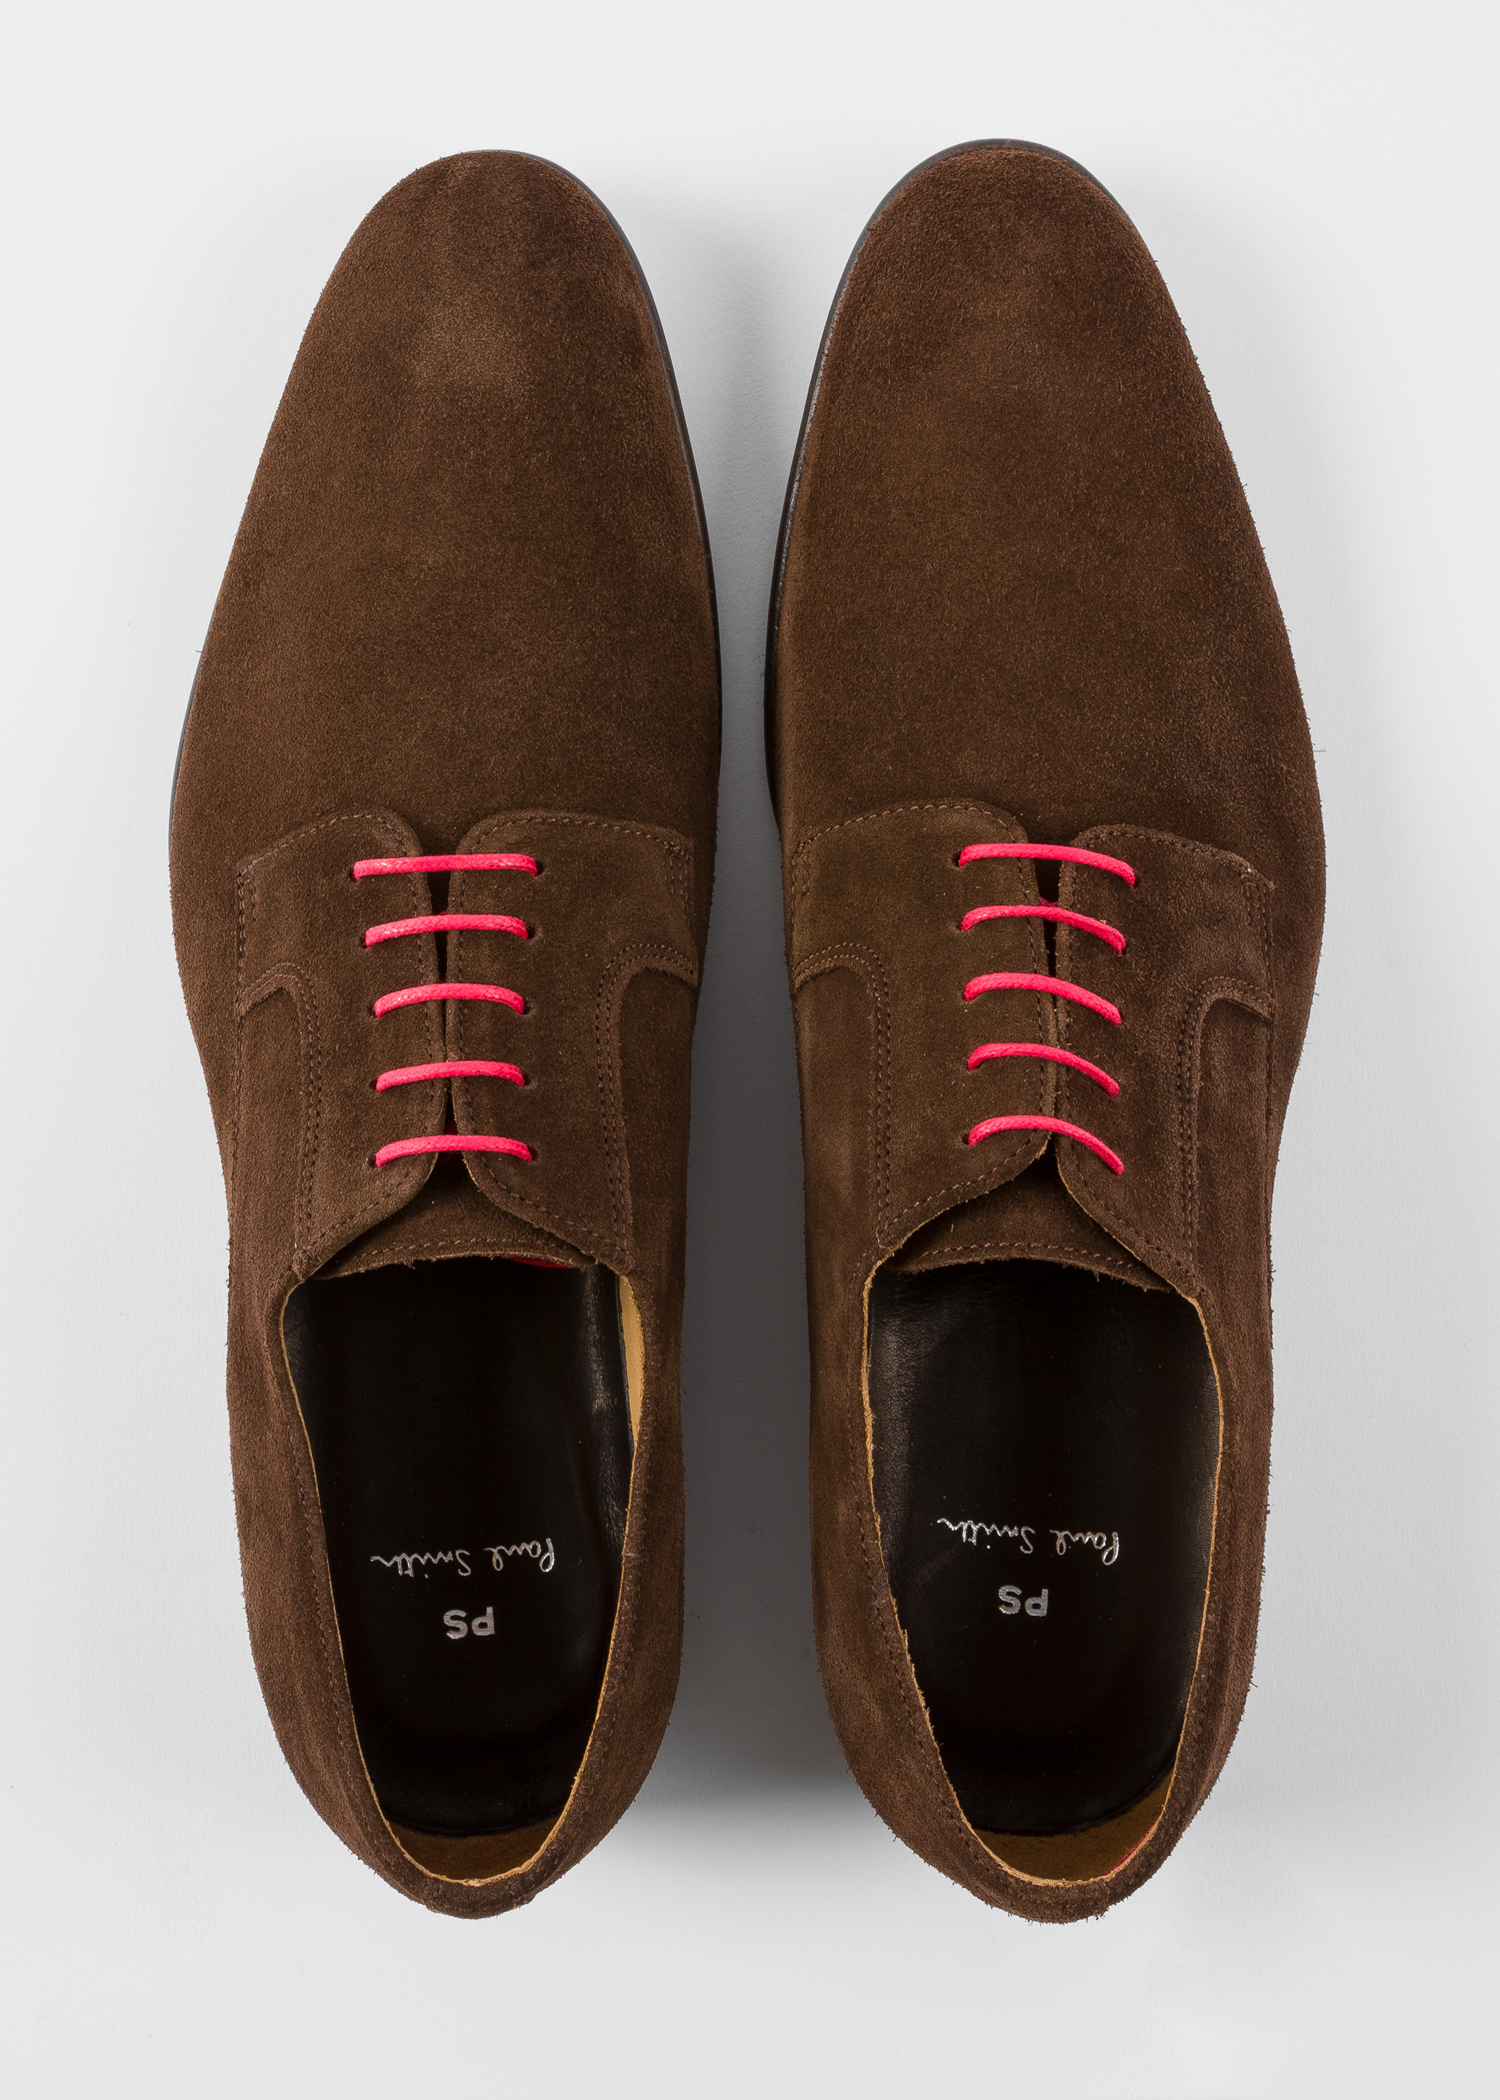 Men's Chocolate Brown Suede Leather 'Gould' Derby Shoes